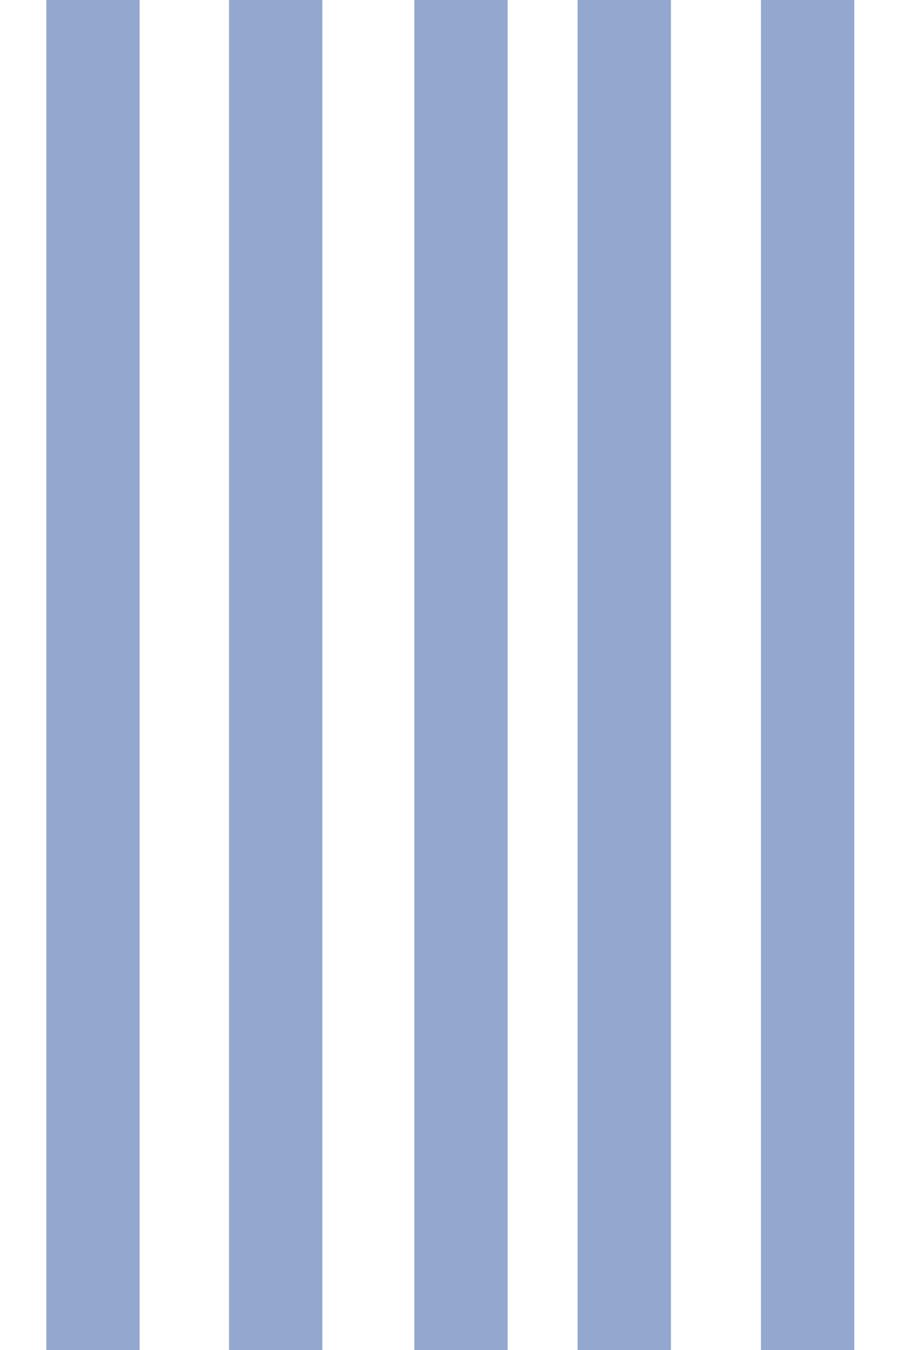 Woolf With Me Fitted Crib Sheet Stripes color_serenity